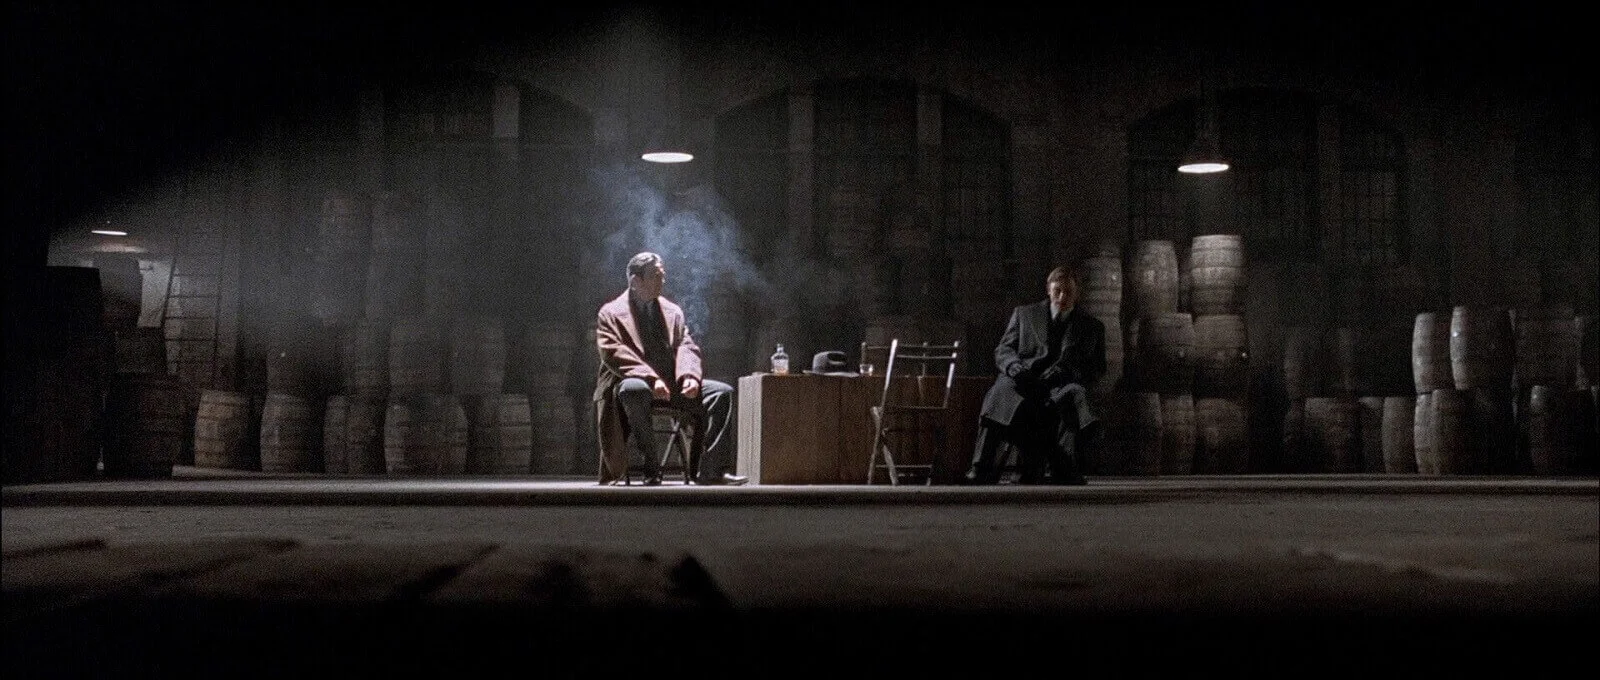 Road to Perdition Awards - Cinematography